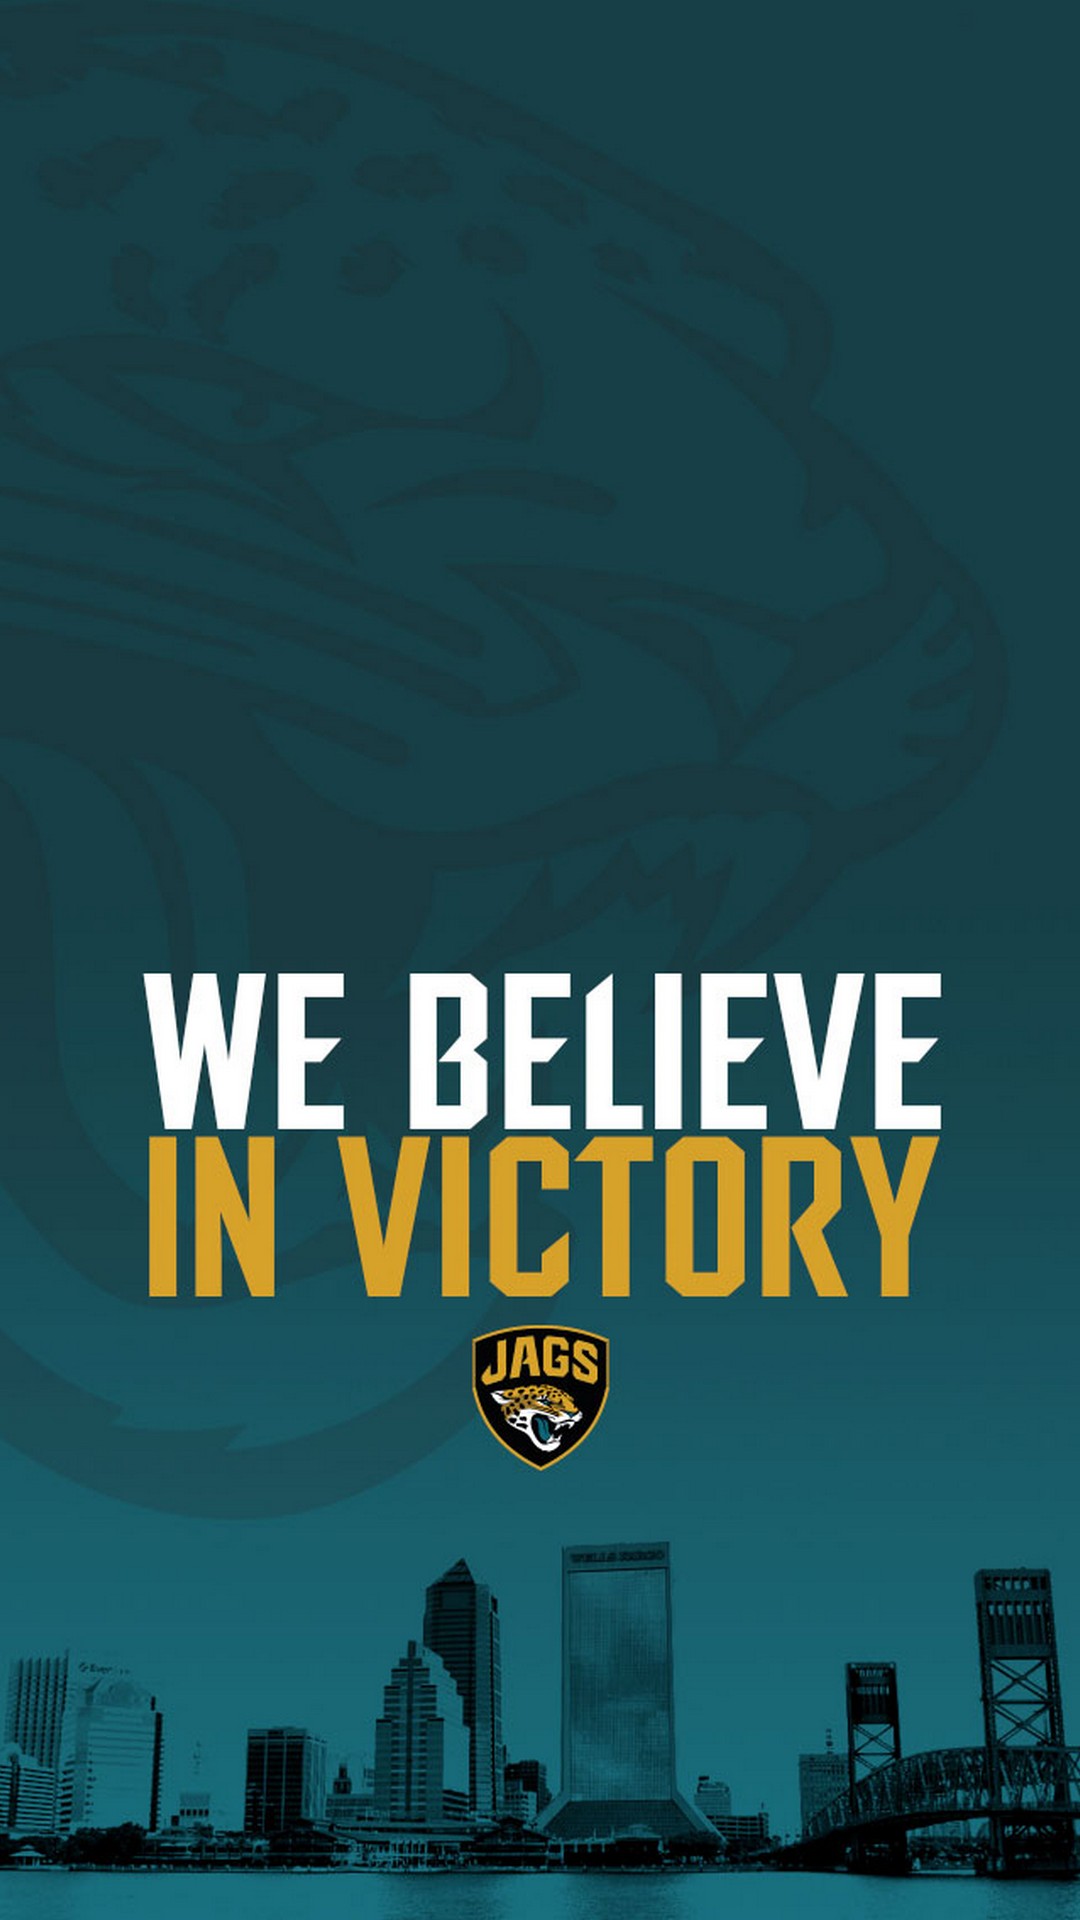 Jacksonville Jaguars iPhone Home Screen Wallpaper with high-resolution 1080x1920 pixel. Download and set as wallpaper for Desktop Computer, Apple iPhone X, XS Max, XR, 8, 7, 6, SE, iPad, Android